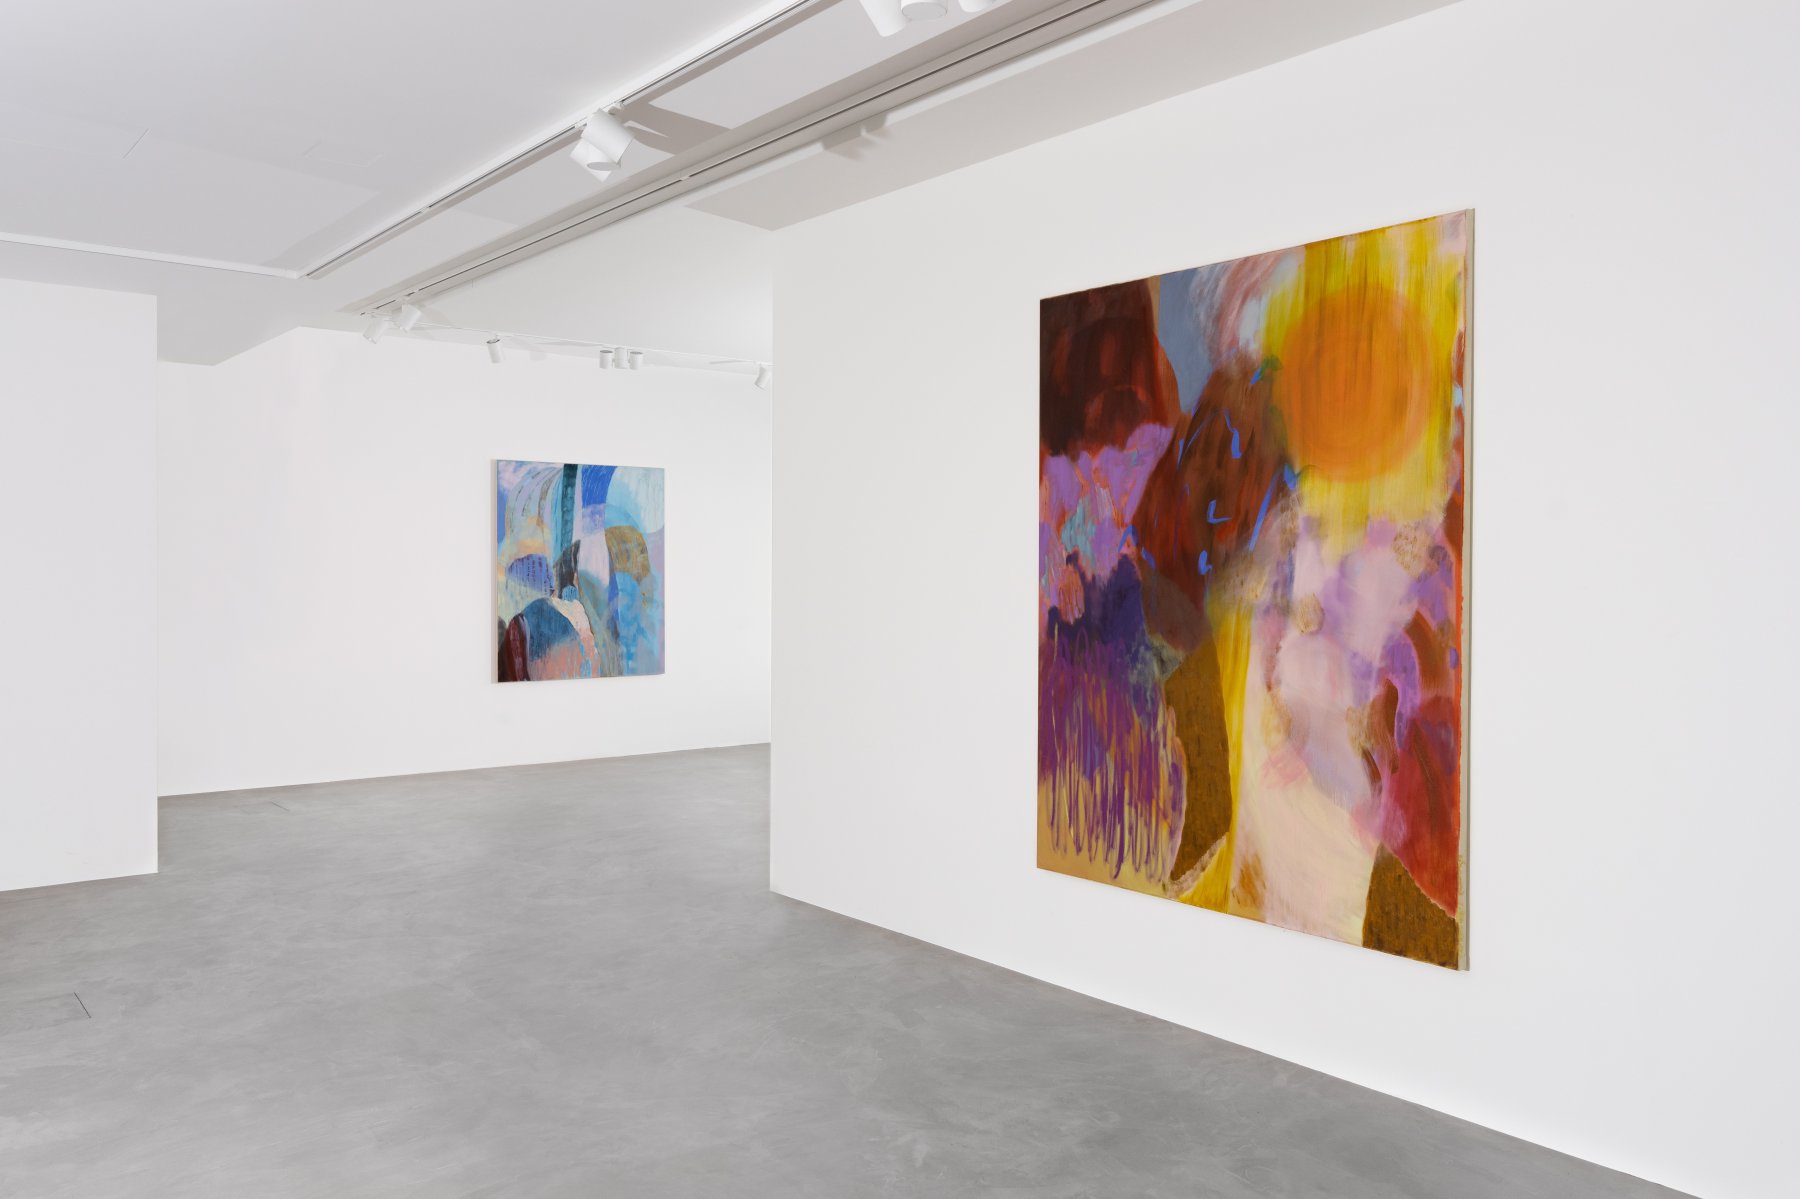 Installation image for Rhiannon Inman-Simpson: A Slow Pulse, at PULPO GALLERY